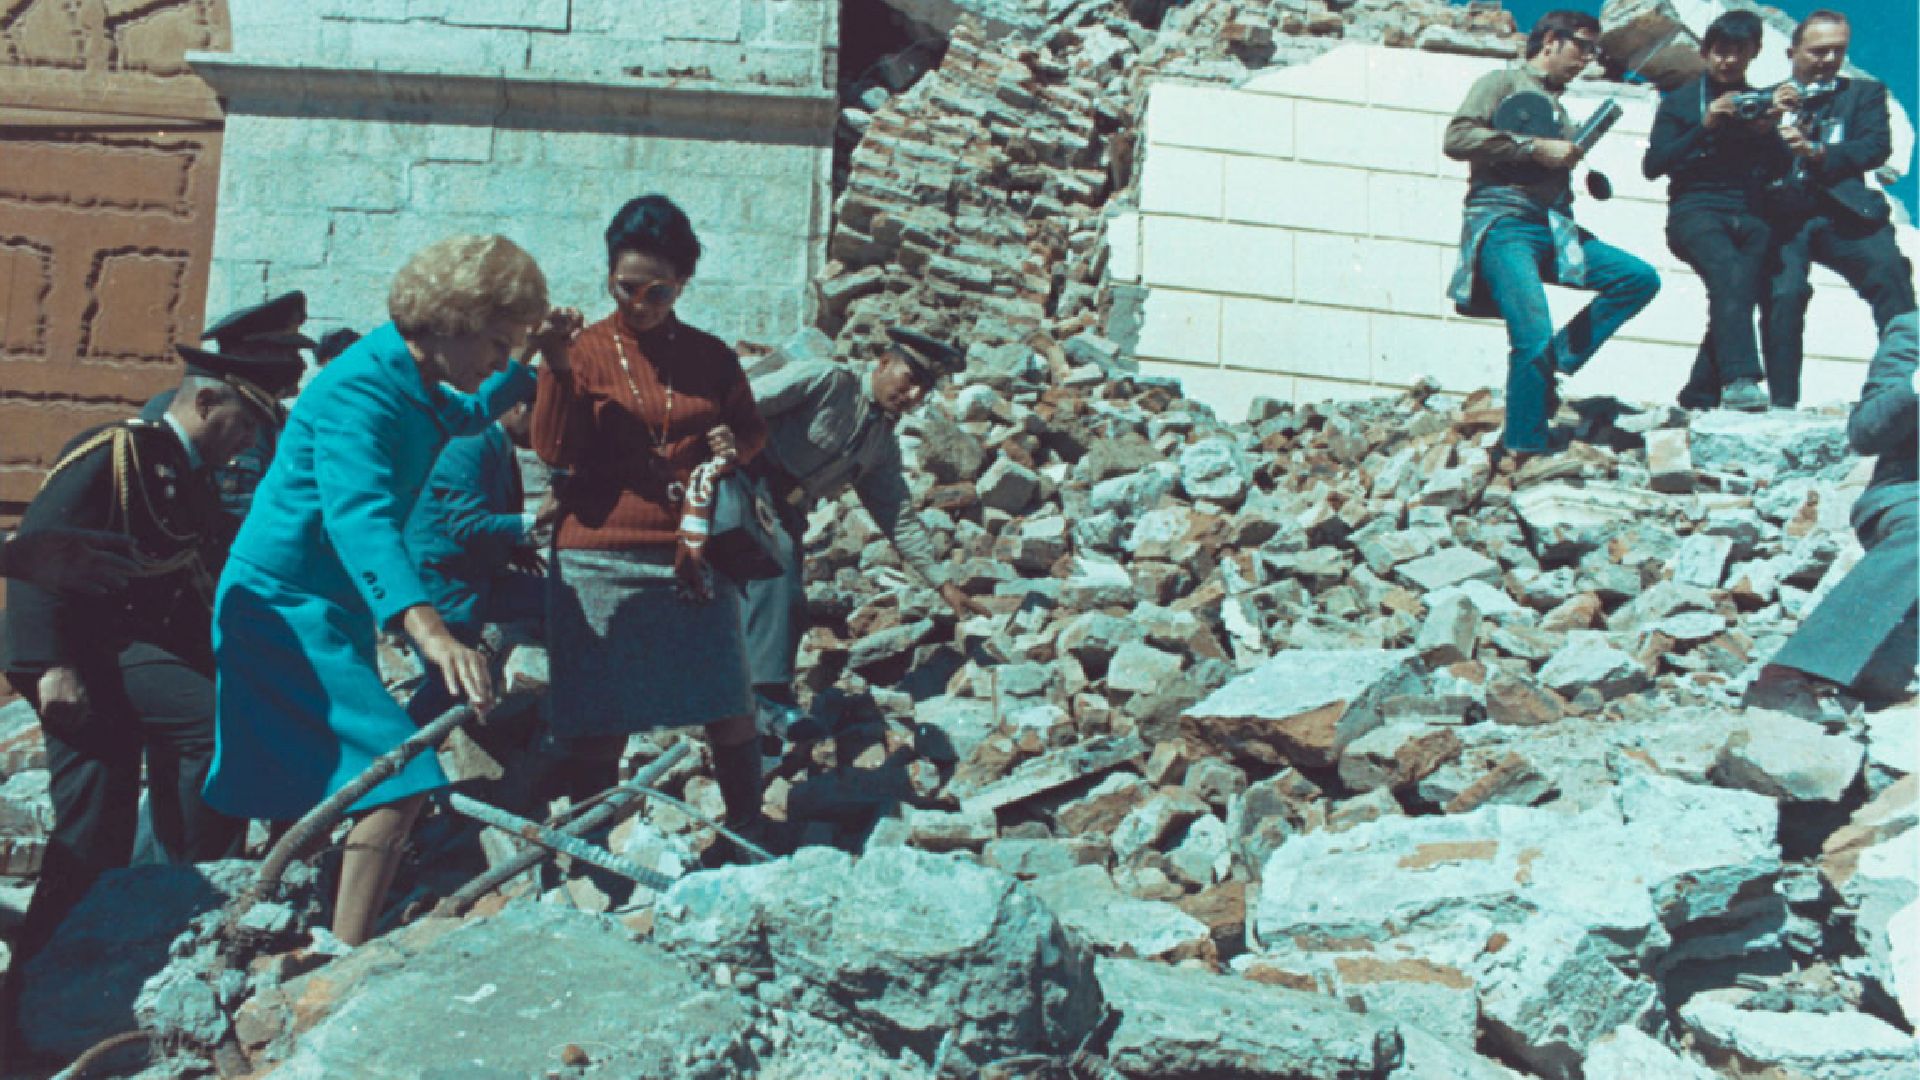 The former first lady of the United States, Pat Nixon, arrived in Peru to see the damage caused by the 1970 earthquake in the Huascarán area (White House Photo Office)